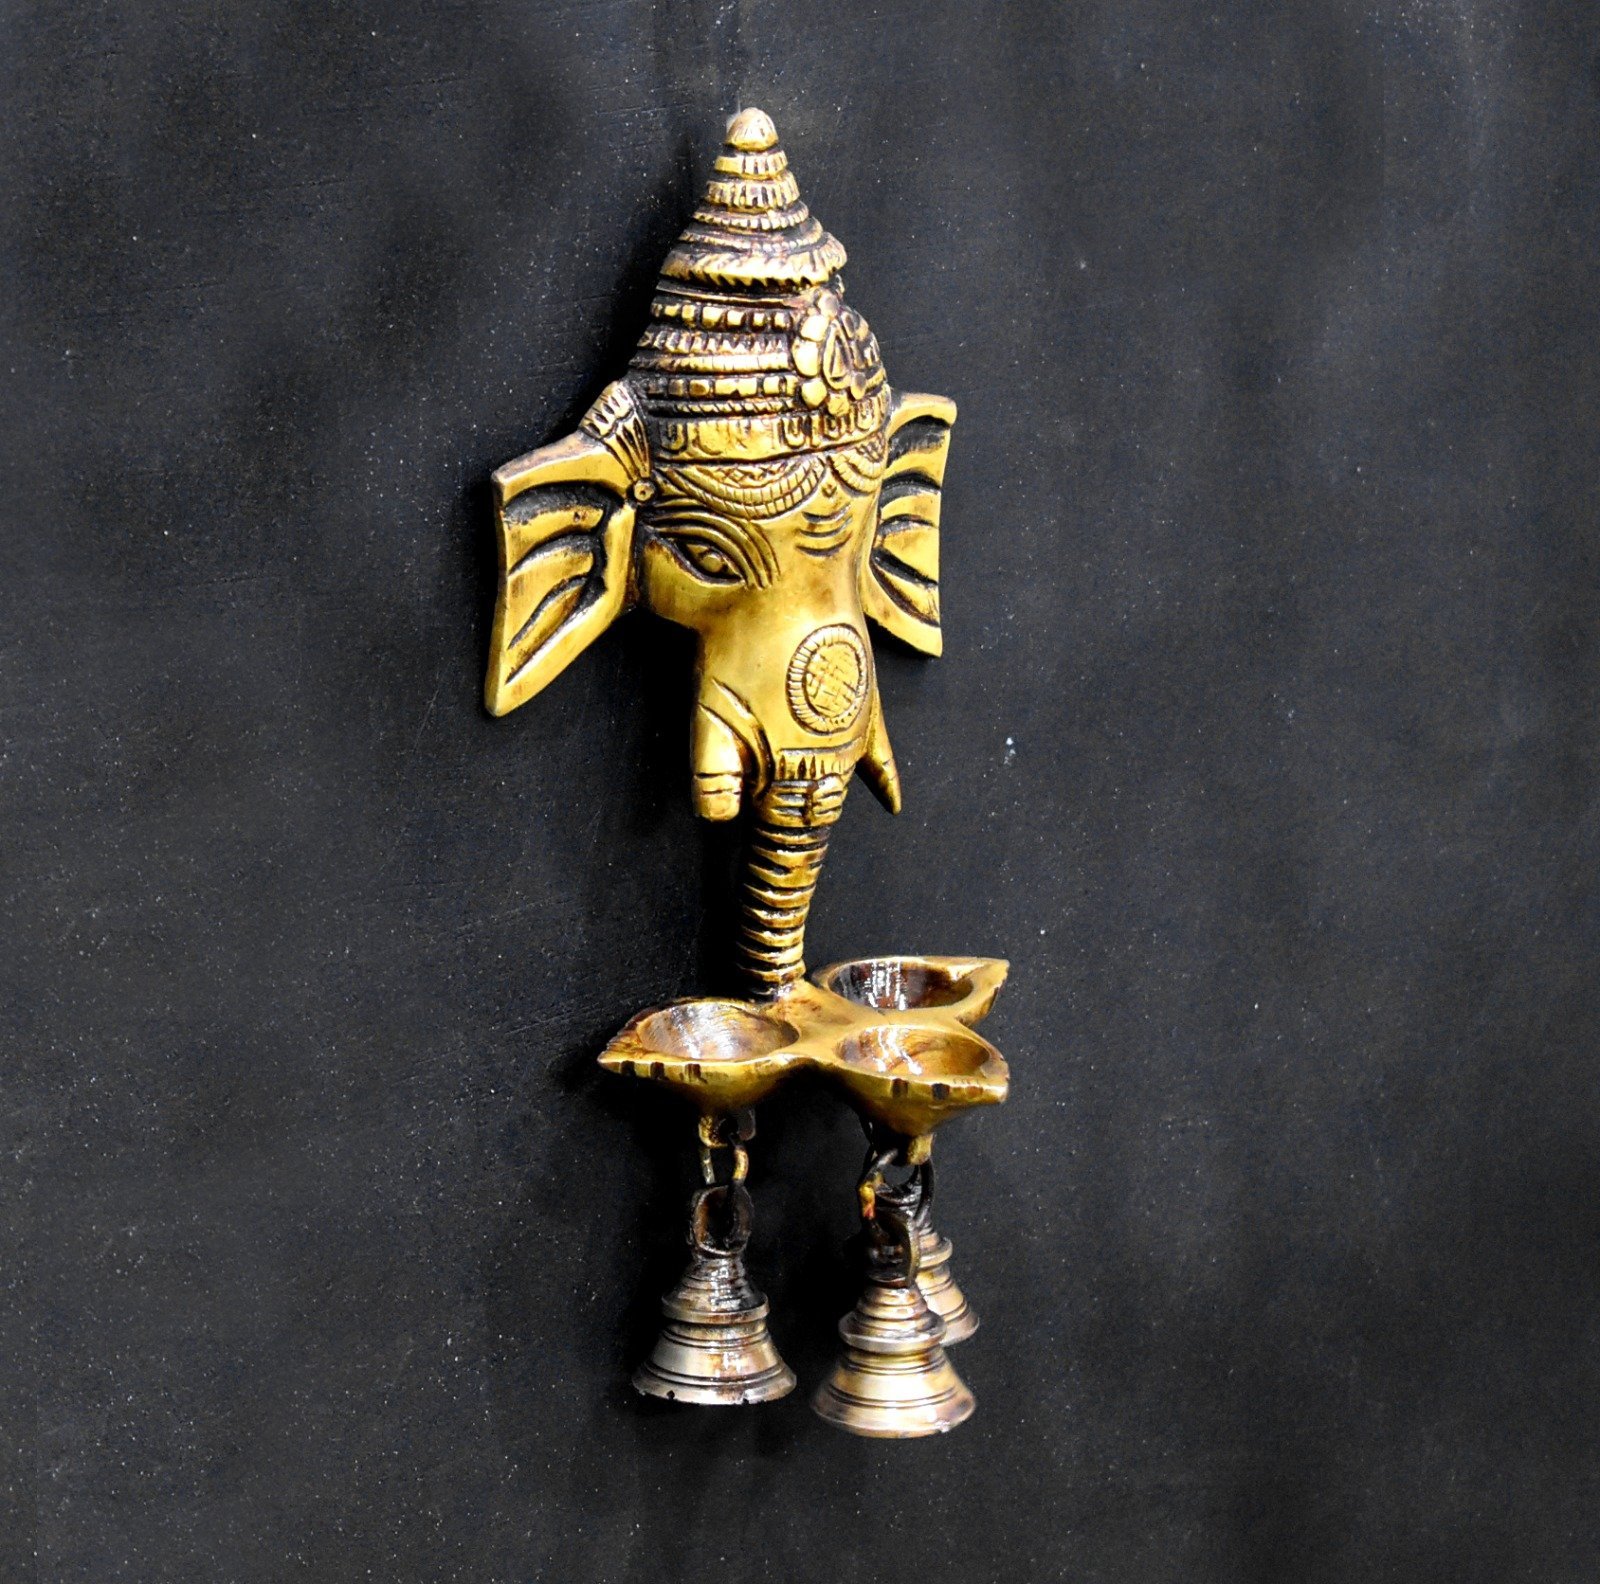 Buy Beautiful Metal Golden Singhasan for God Idol, Pooja, Home Decor, Car  Dashboard Gift Item 6INCH/15CM Online In India At Discounted Prices